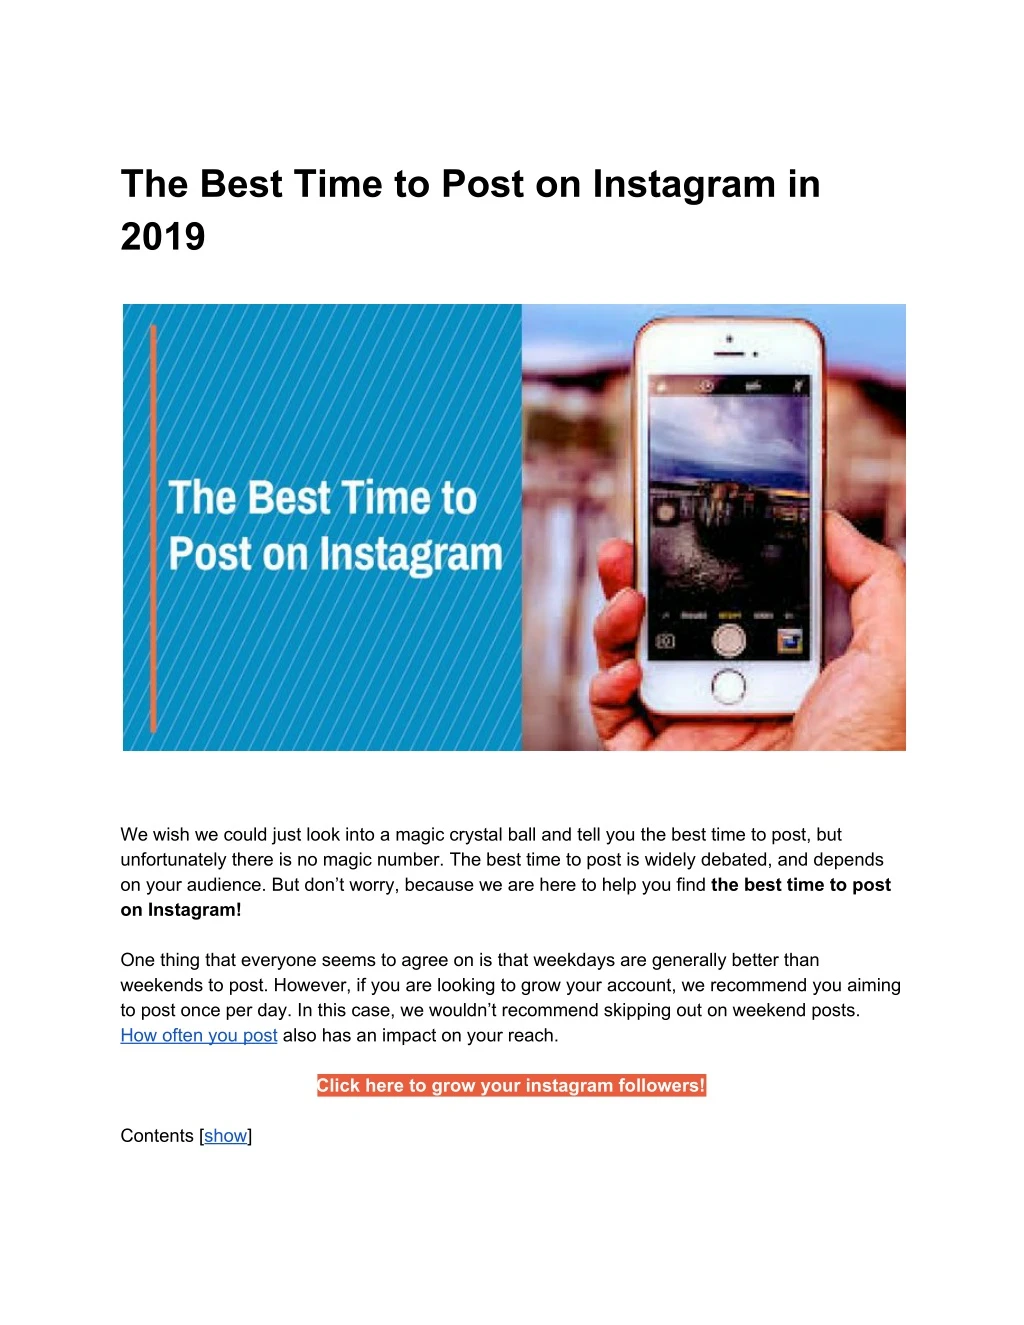 the best time to post on instagram in 2019